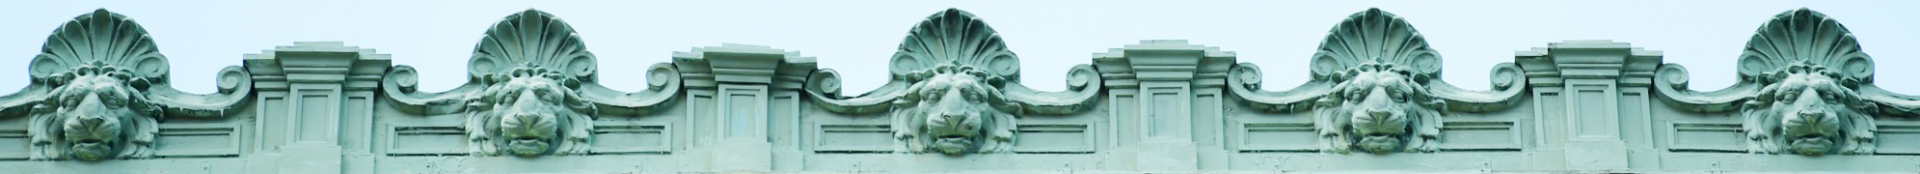 Columbia University campus architecture featuring a lion head mascot. 